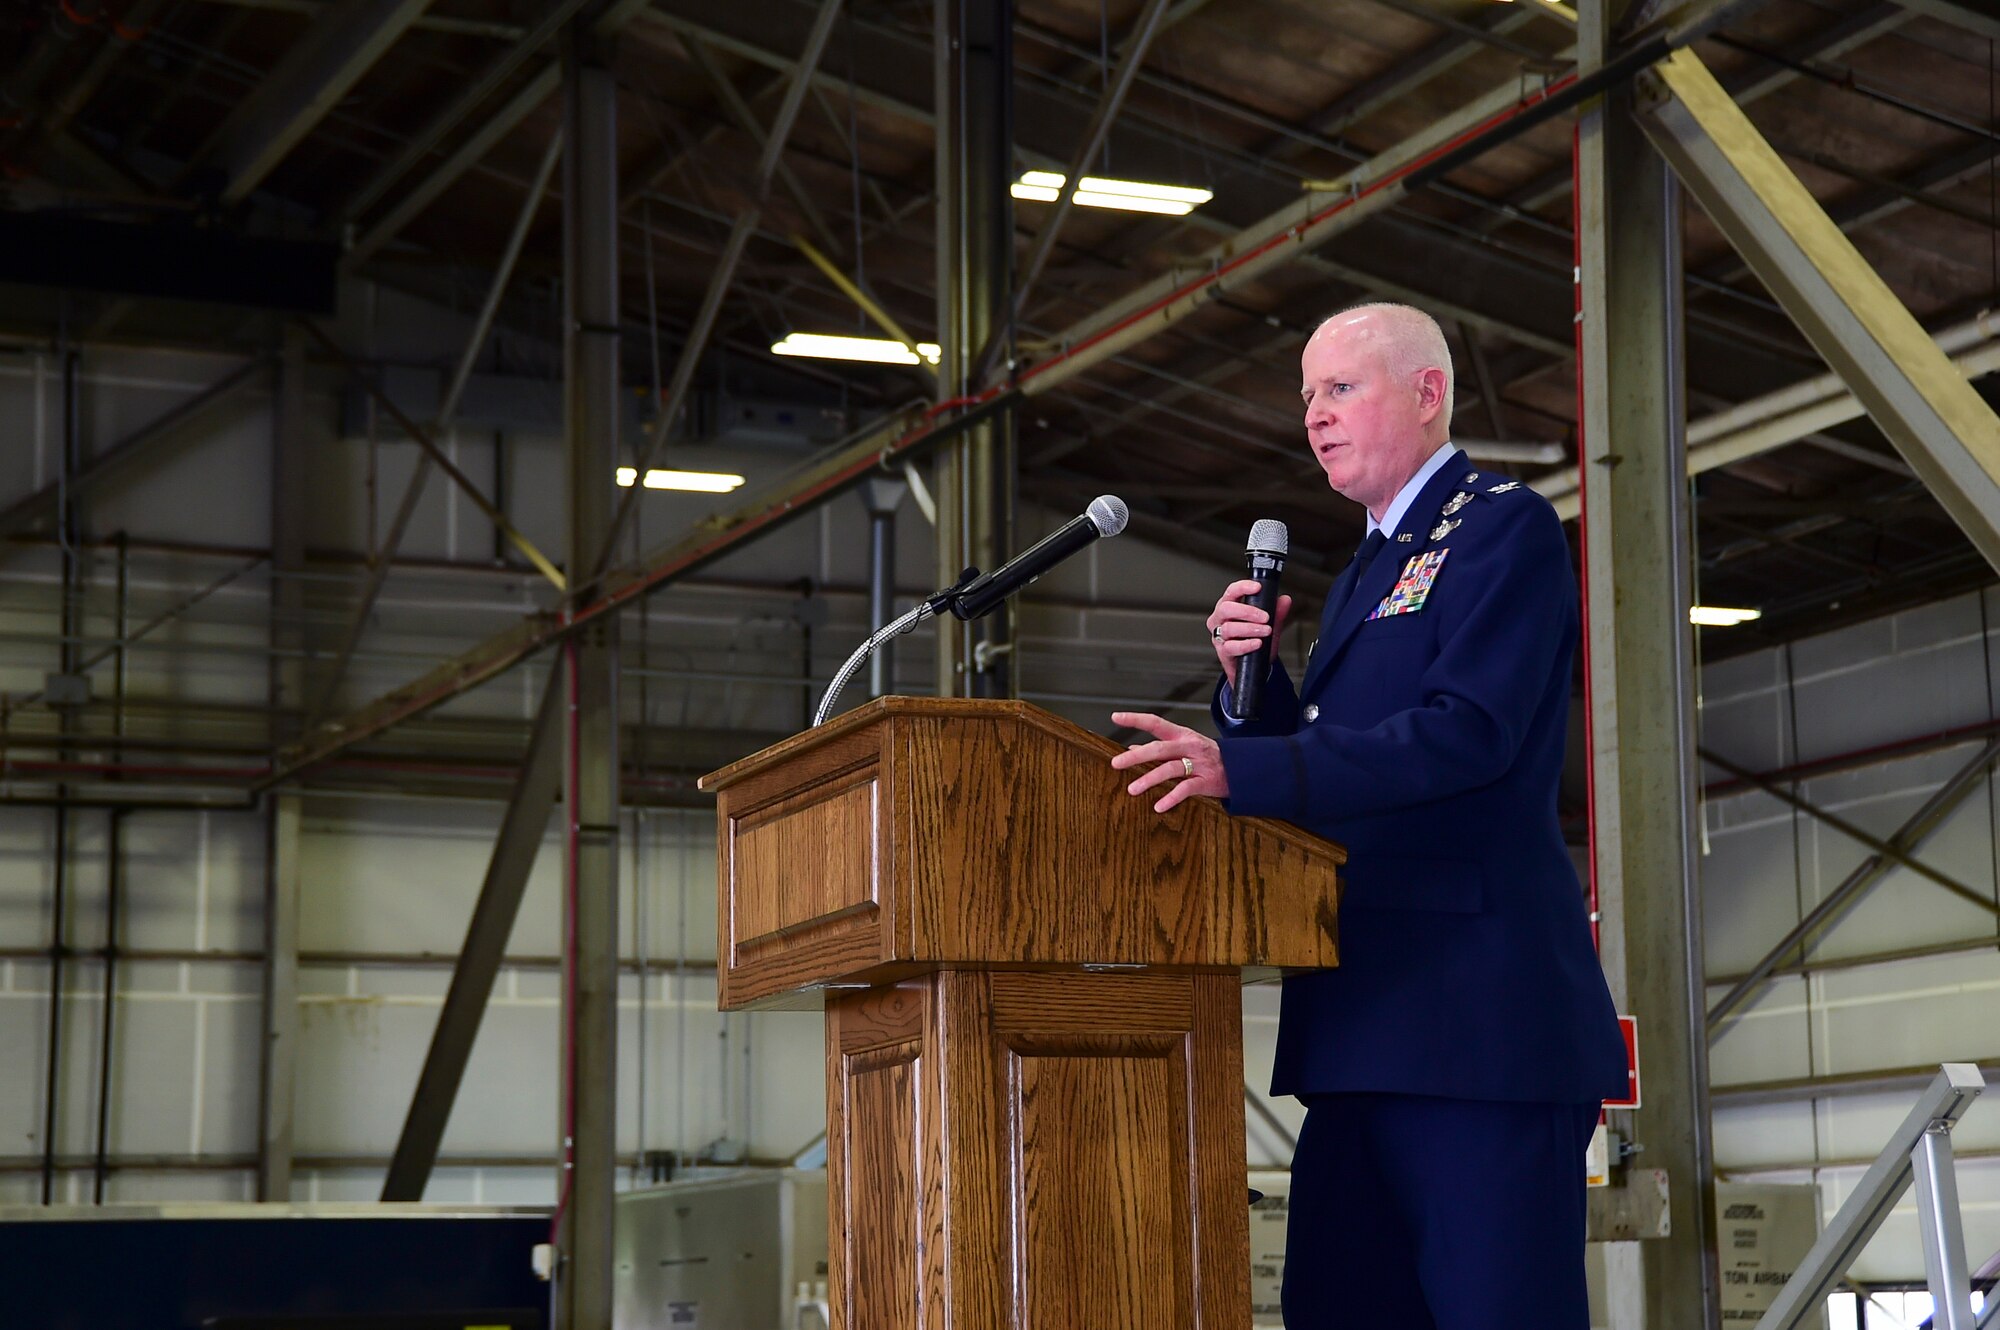 Col. Thomas O. Pemberton, 434th Air Refueling Wing commander, speaks to attendees of his assumption of command ceremony at Grissom Air Reserve Base, Ind. April 10, 2021. Prior to his new command of the Hoosier Wing, Pemberton was the 514th Air Mobility Wing commander at Joint Base McGuire-Dix-Lakehurst, New Jersey. (U.S. Air Force photo by Staff Sgt. Chris Massey)